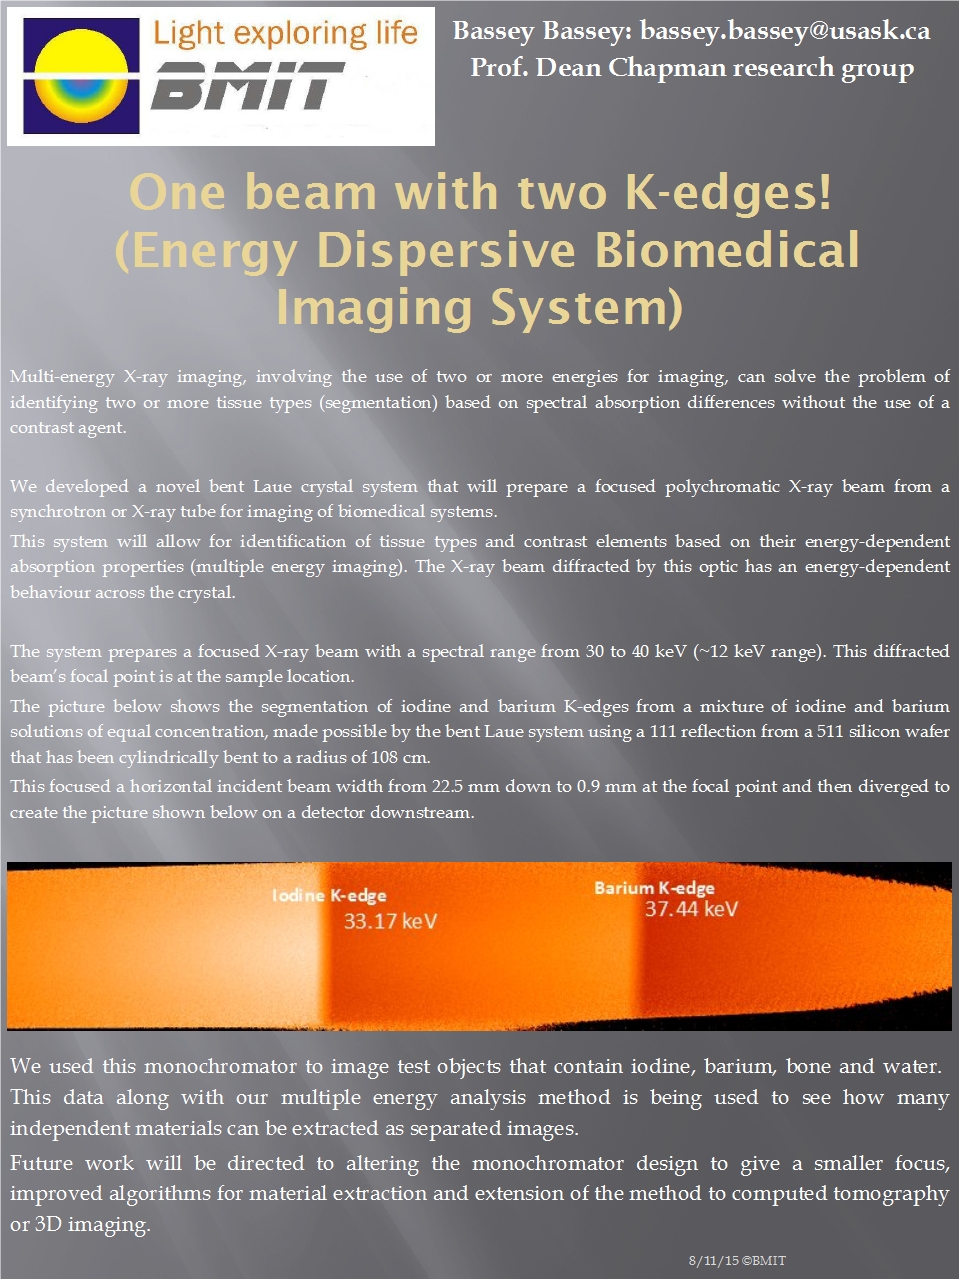 One Beam With Two K-Edges! Image